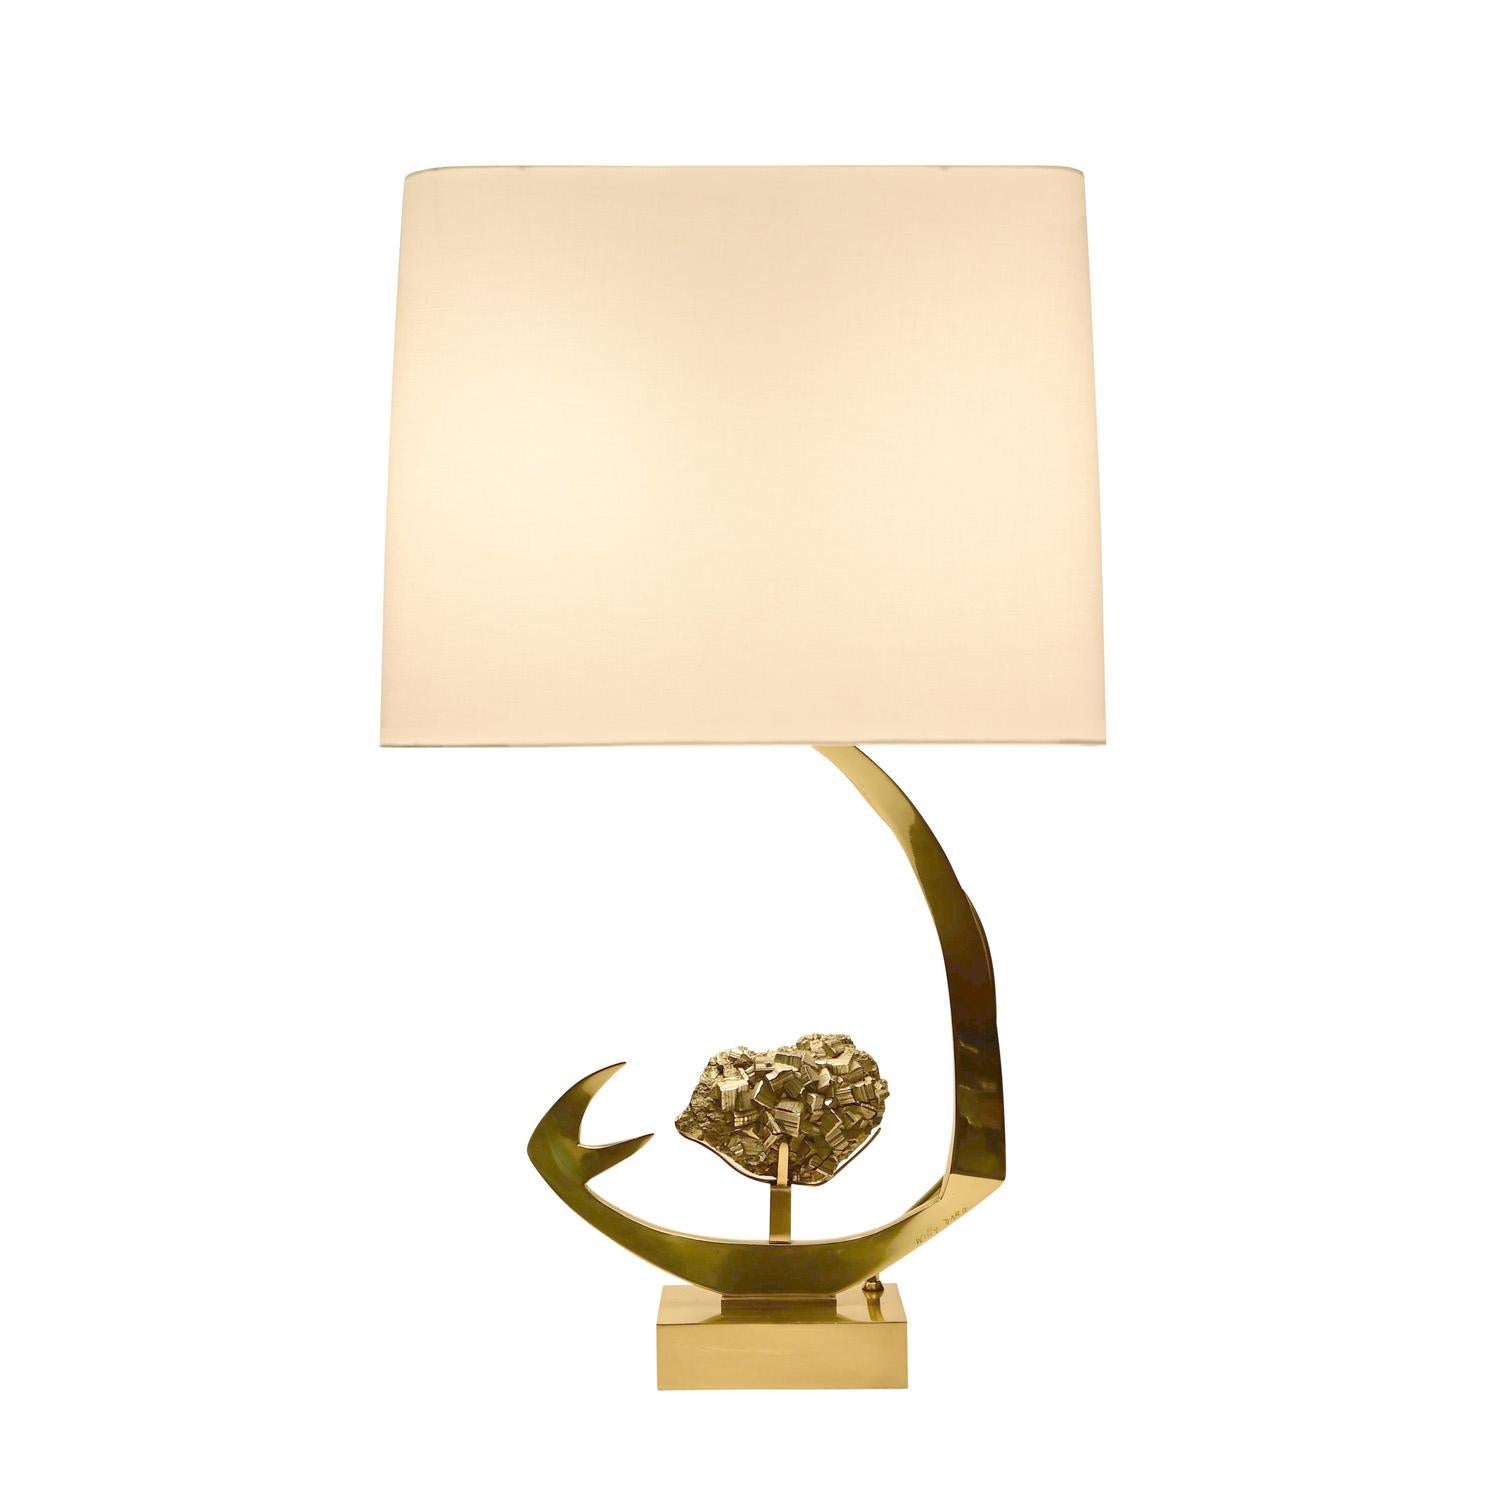 Hand-Crafted Willy Daro Sculptural Table Lamp with Mounted Pyrite 1970s (signed) For Sale